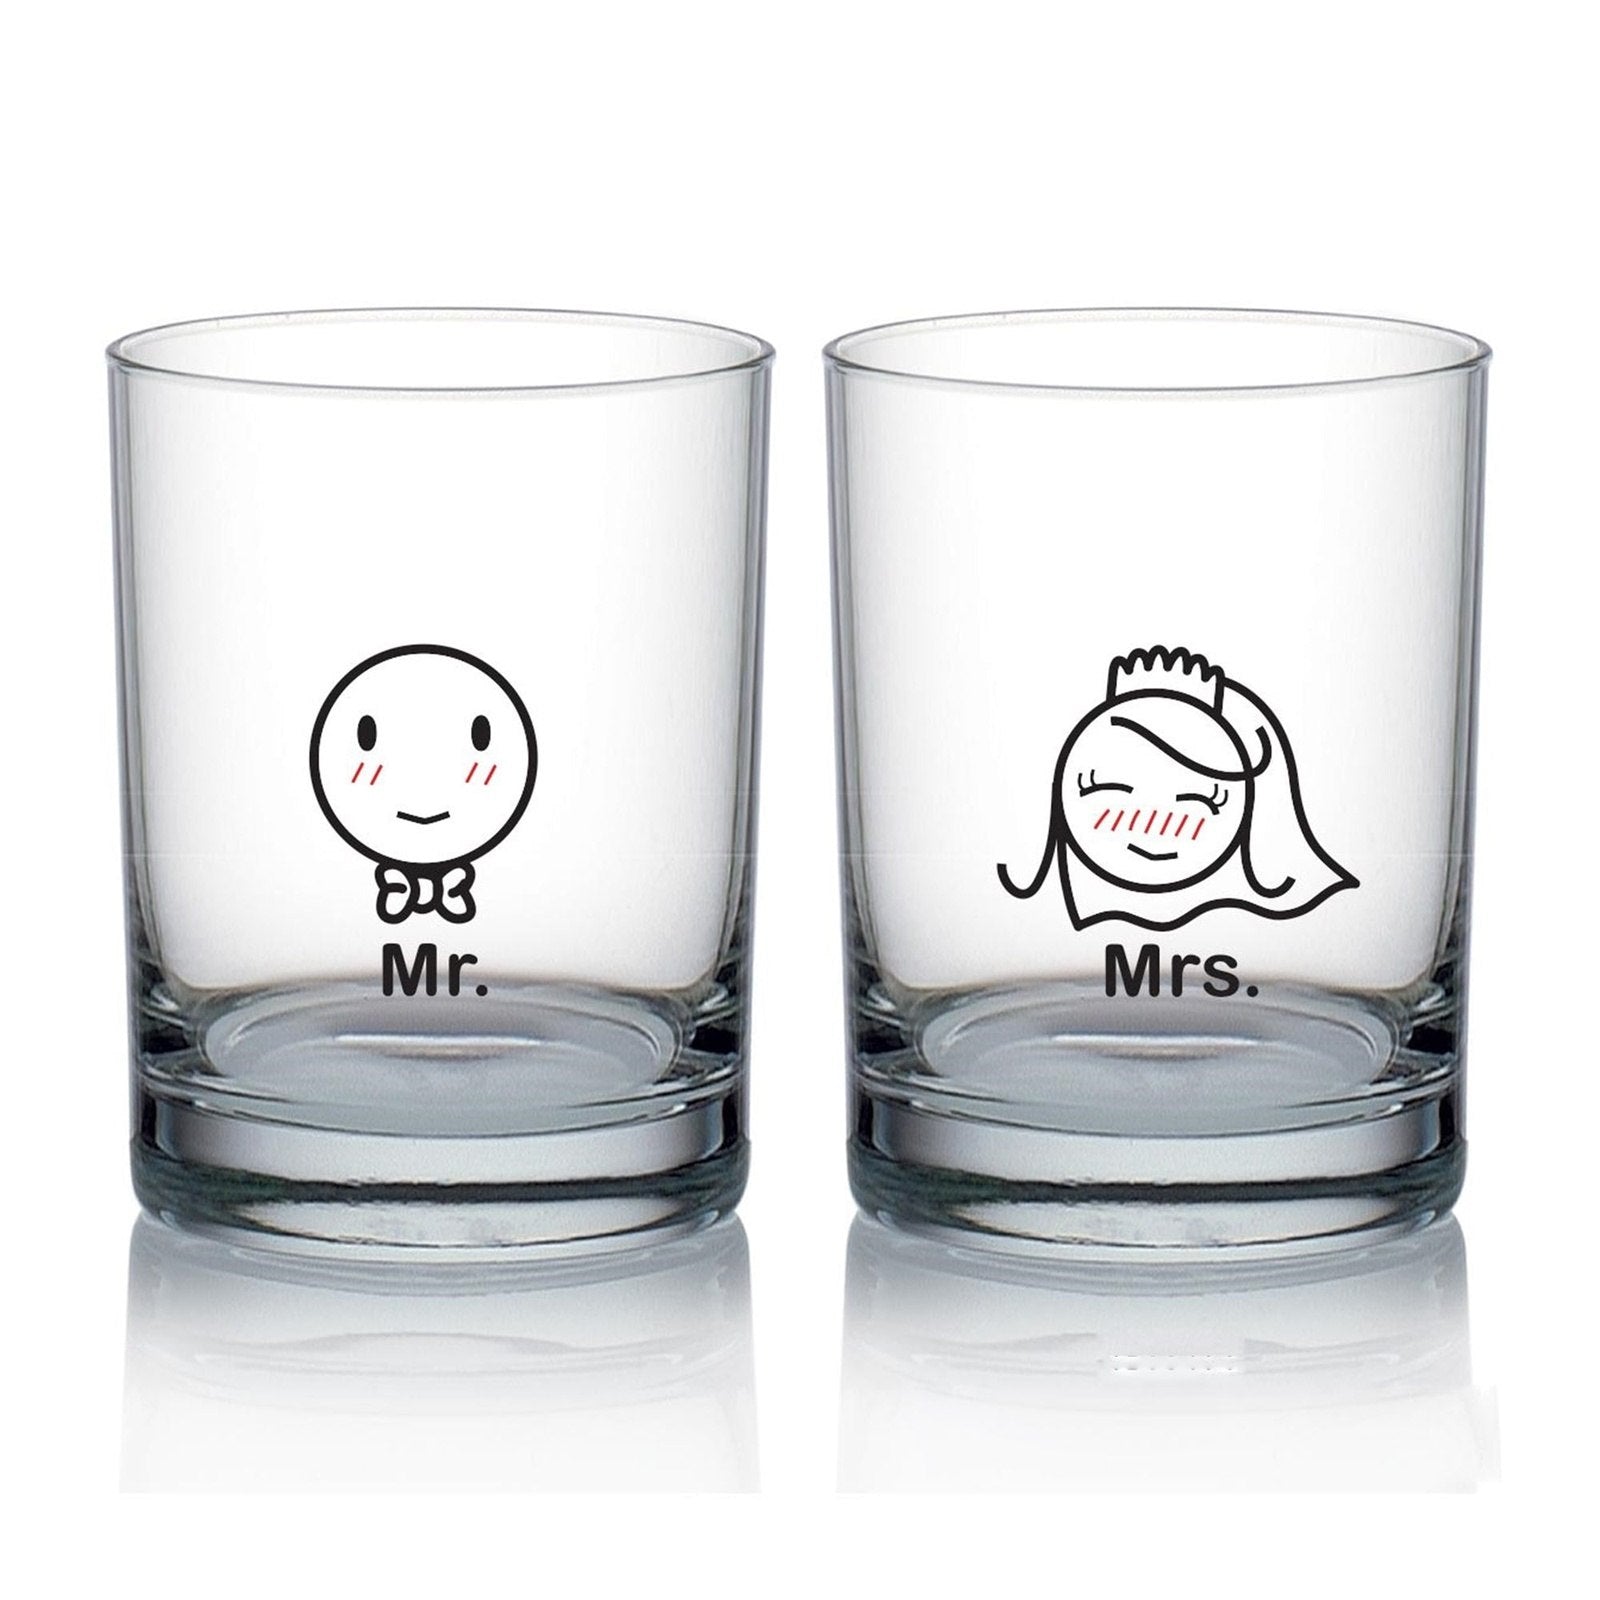 Mr and MrsHome & GardenHuman Touch OfficialThe perfect gift for the modern Mr and Mrs: show your love with this unique double-sided glass! Combining two hearts into one, it features the lovely "Mr" and "Mrs" 